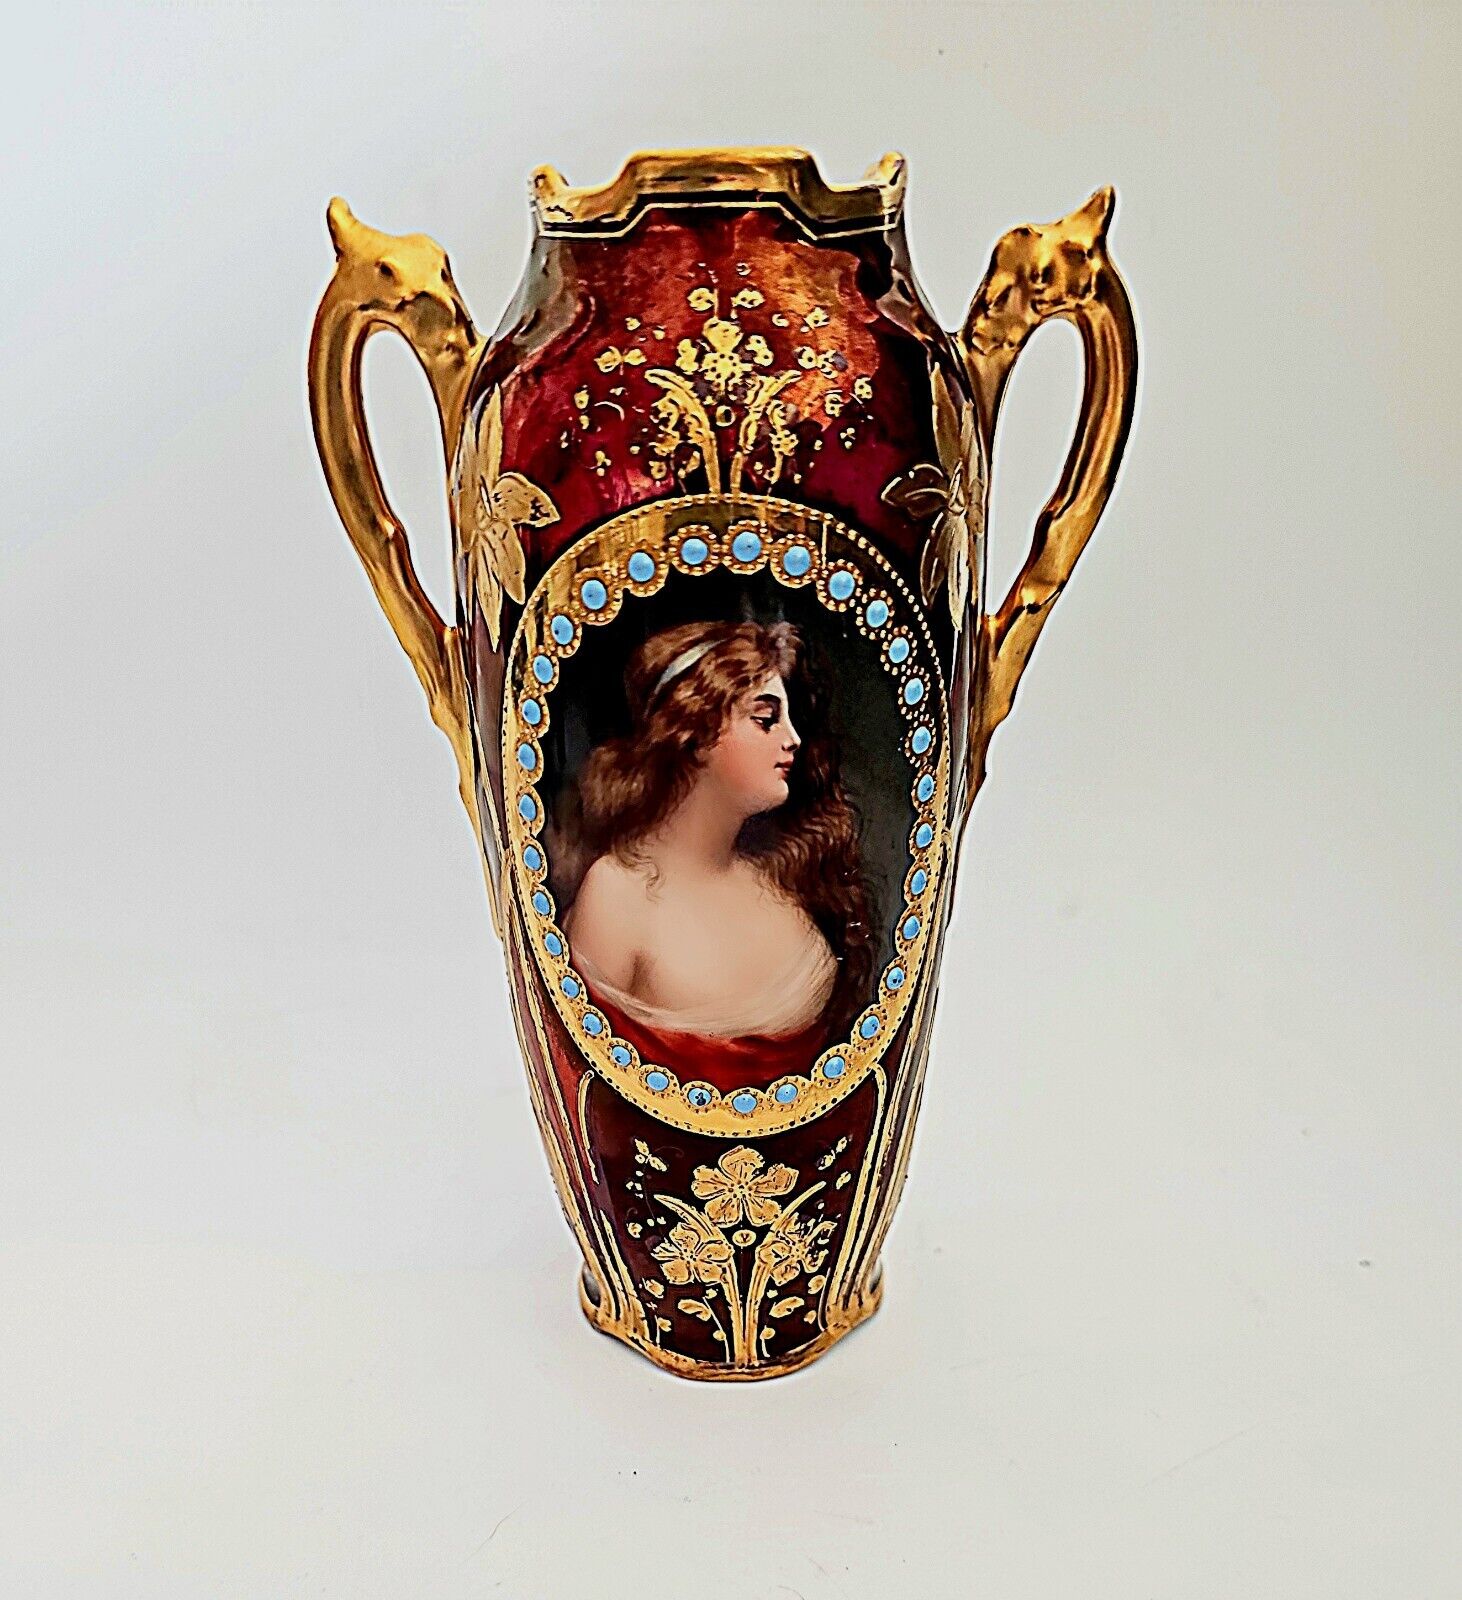 ANTIQUE ROYAL VIENNA STYLE WOMAN PORTRAIT MAROON JEWELED VASE . HAND PAINTED